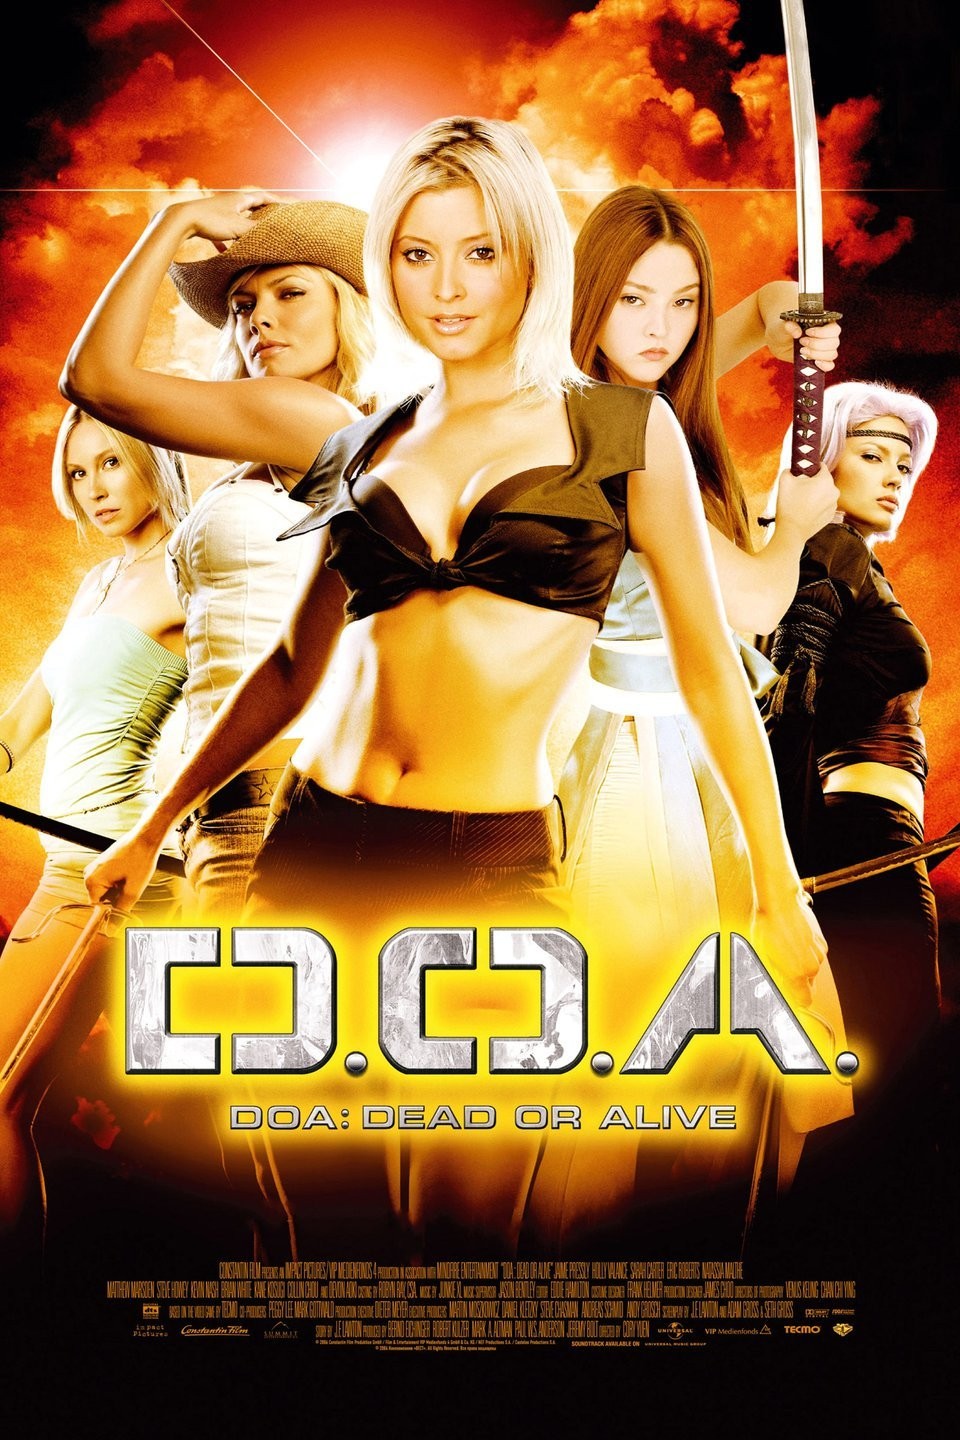 Here's Where to Stream the Video Game Movie DOA: Dead or Alive